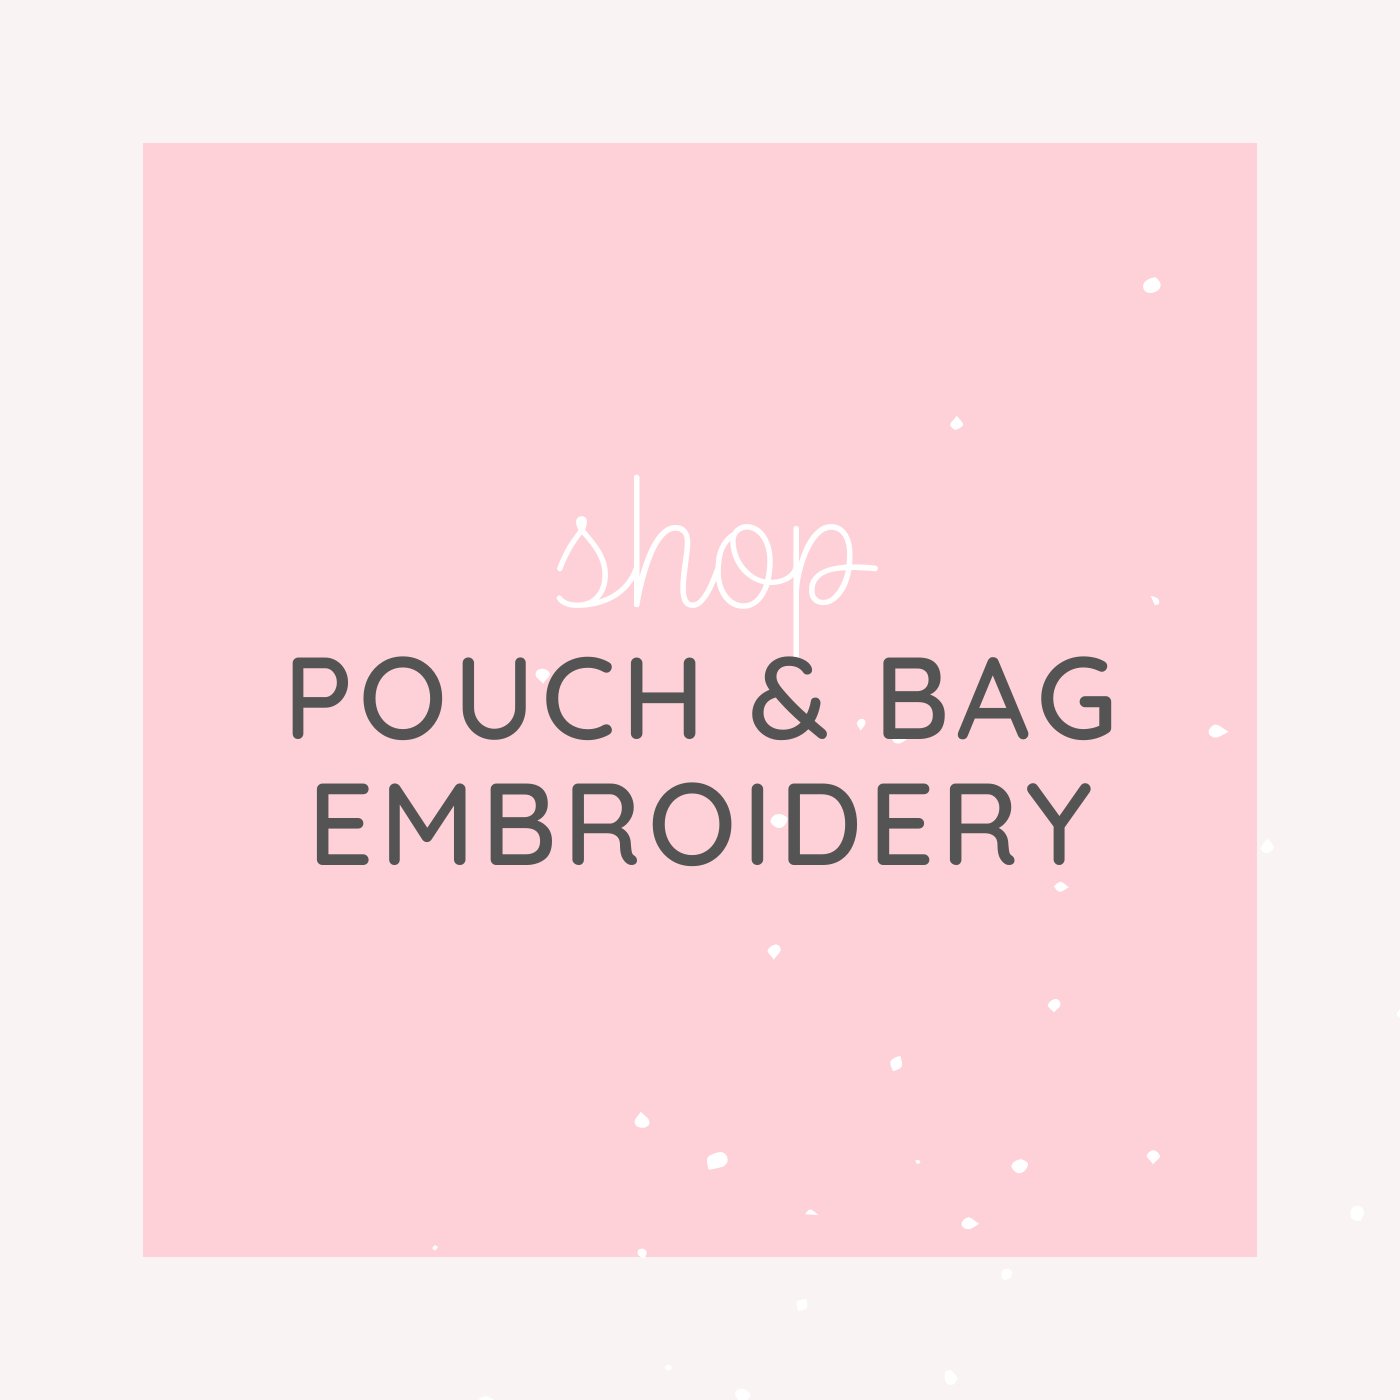 Pouch and Bag Embroidery